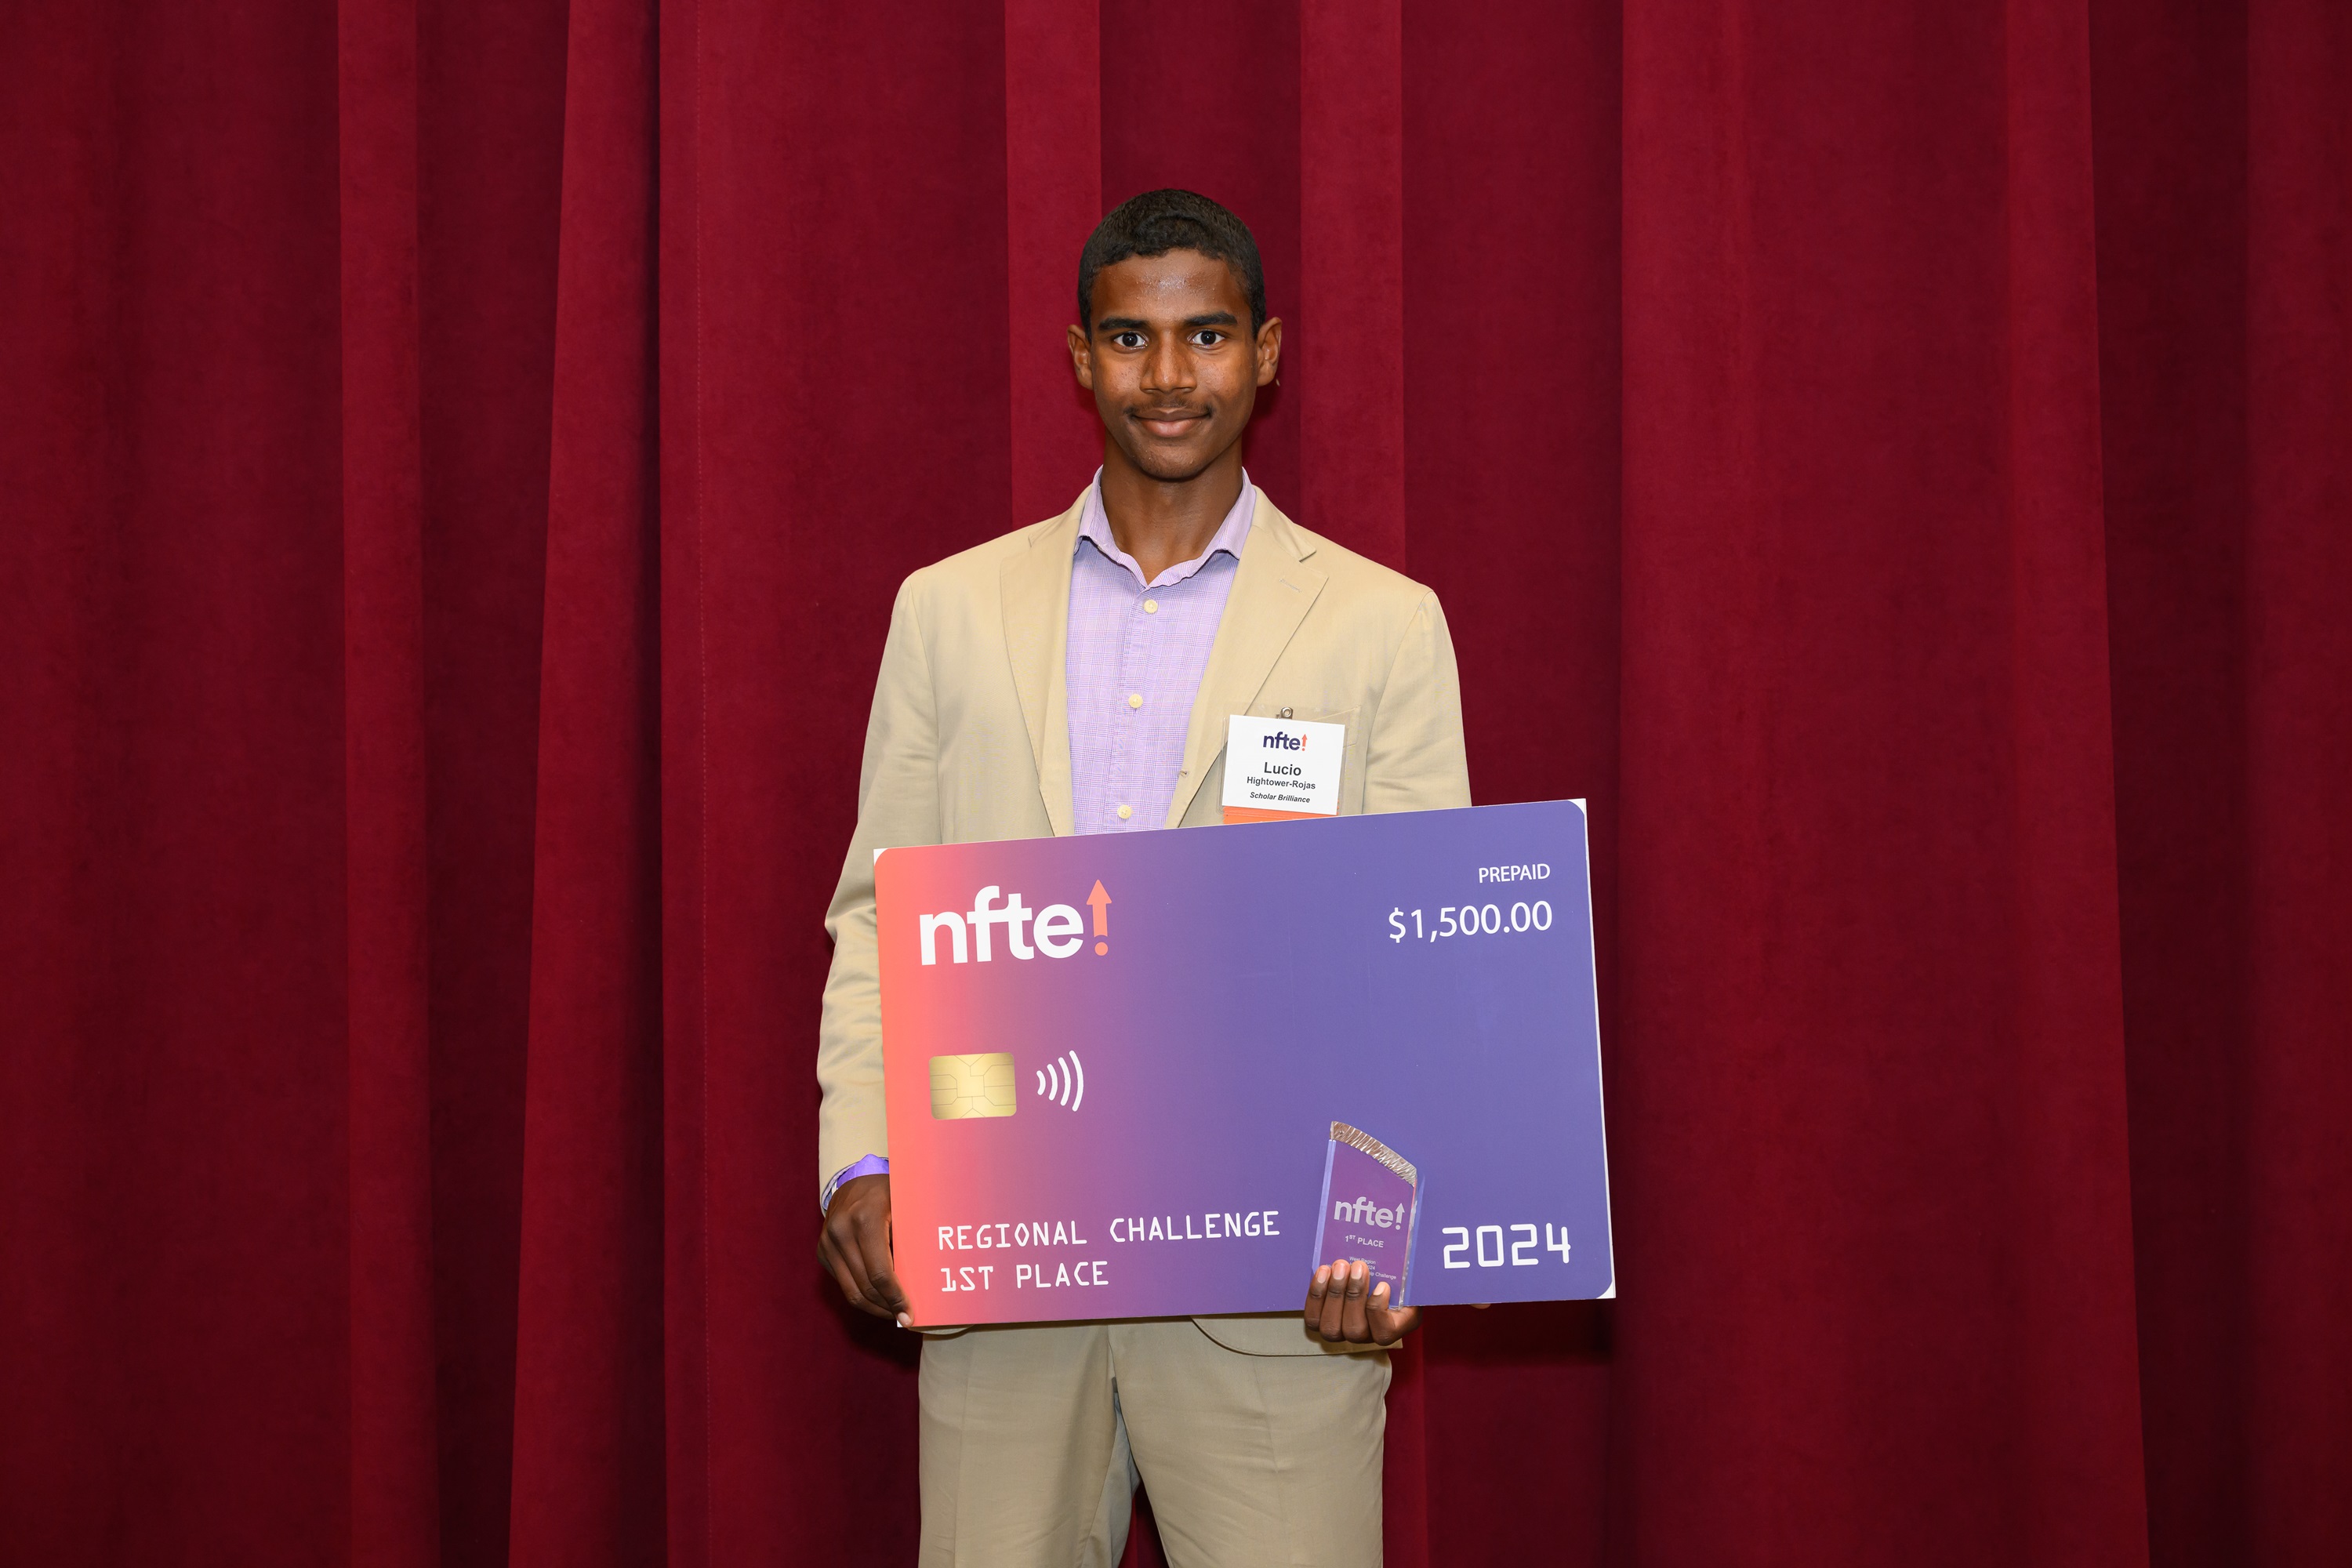 NFTE West (Southern California) Youth Entrepreneurship Challenge Champion